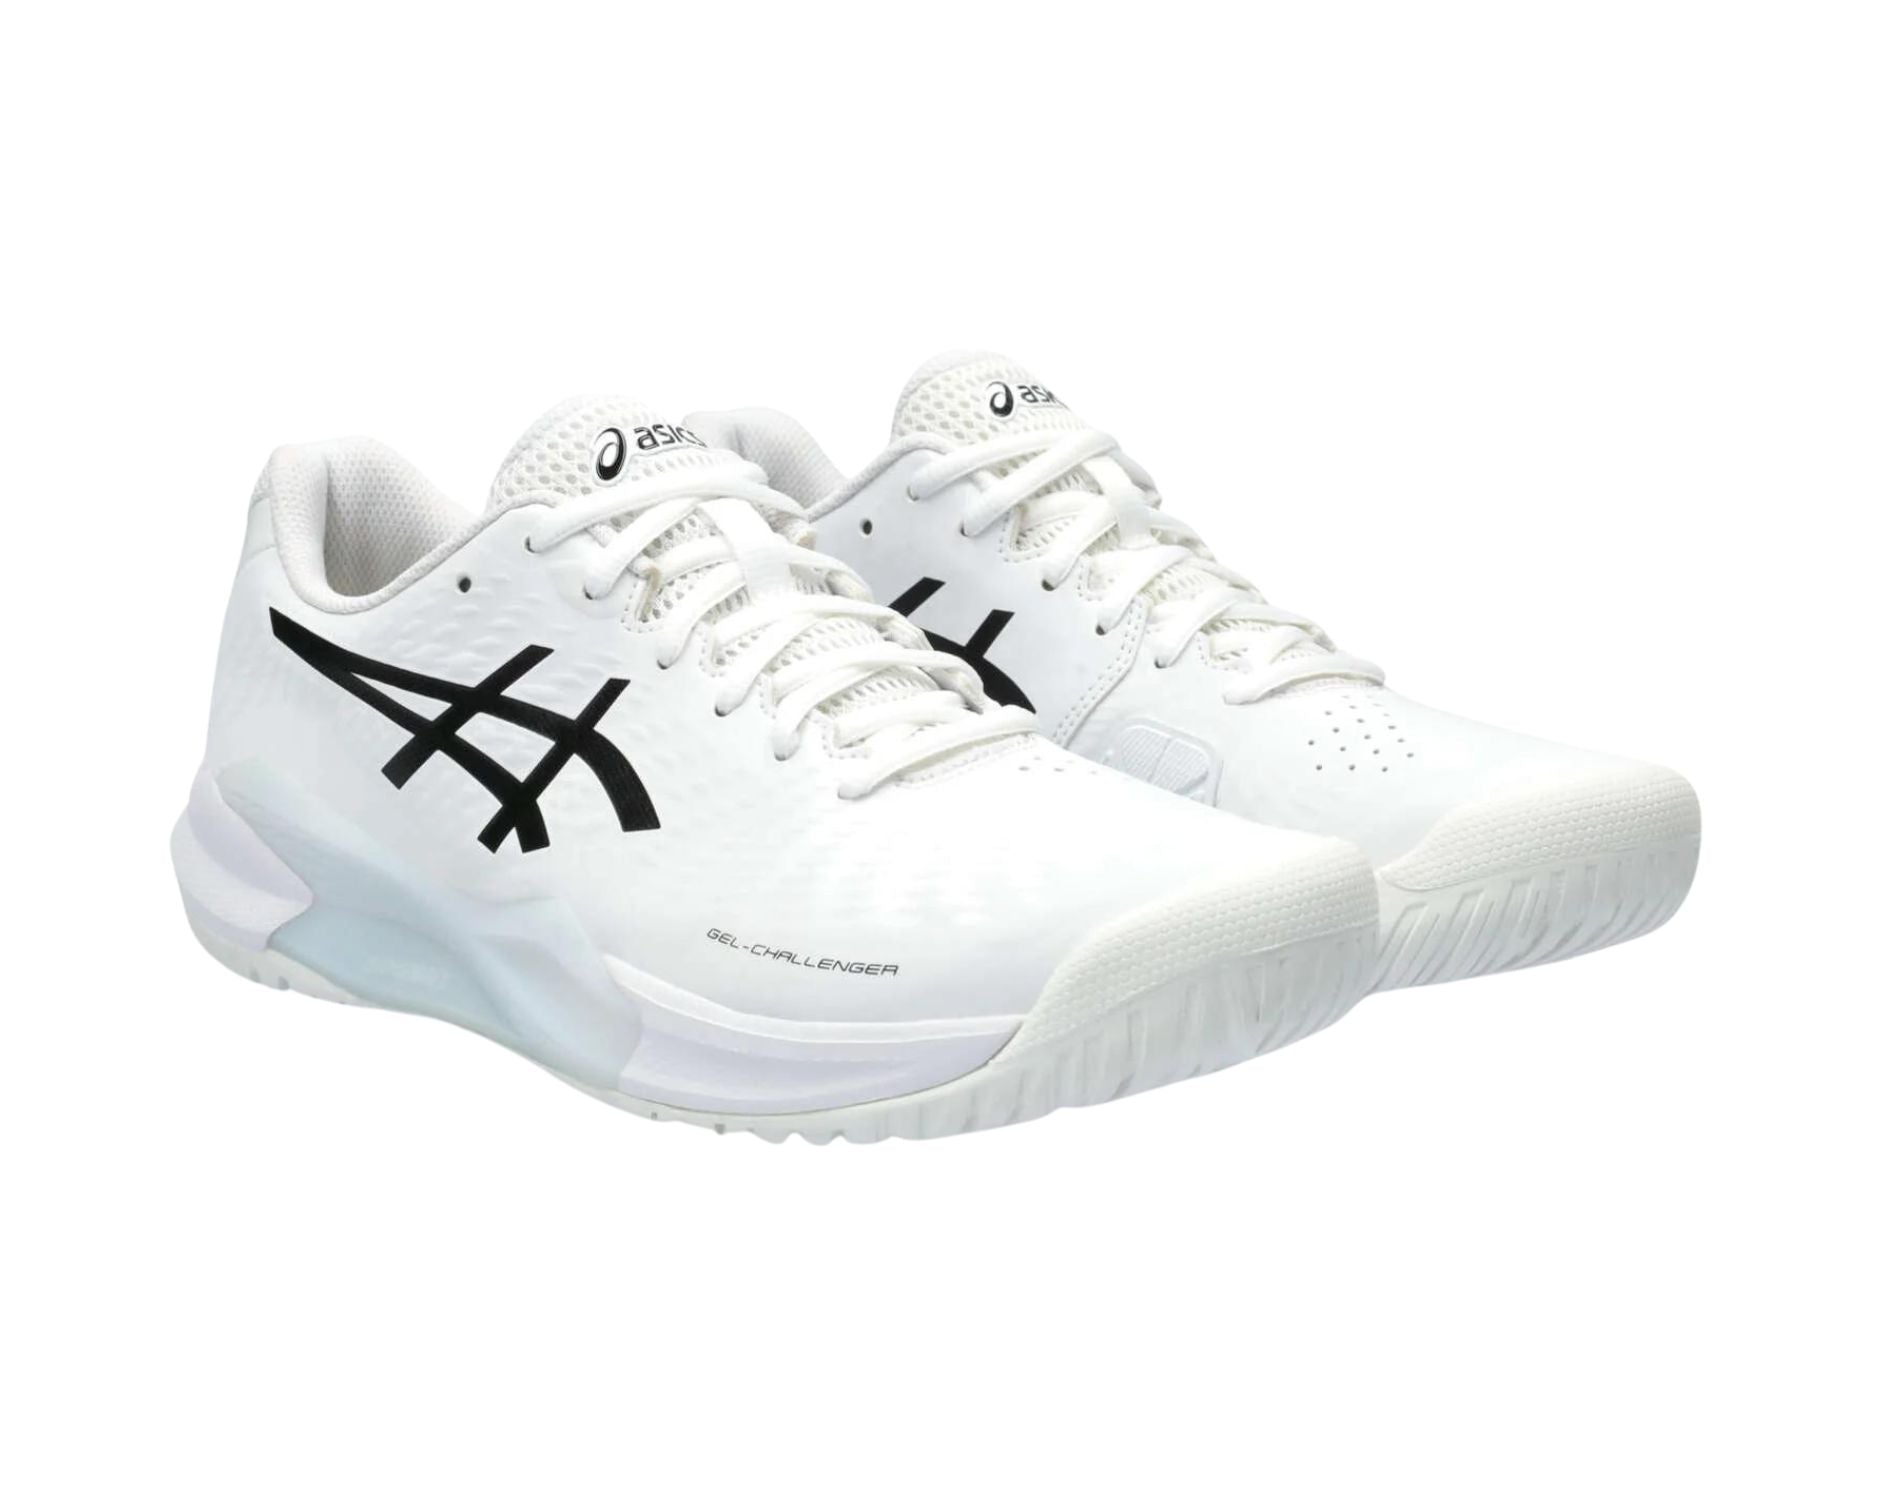 Asics Challenger 14 mens running shoes in d standard width in white and black colour